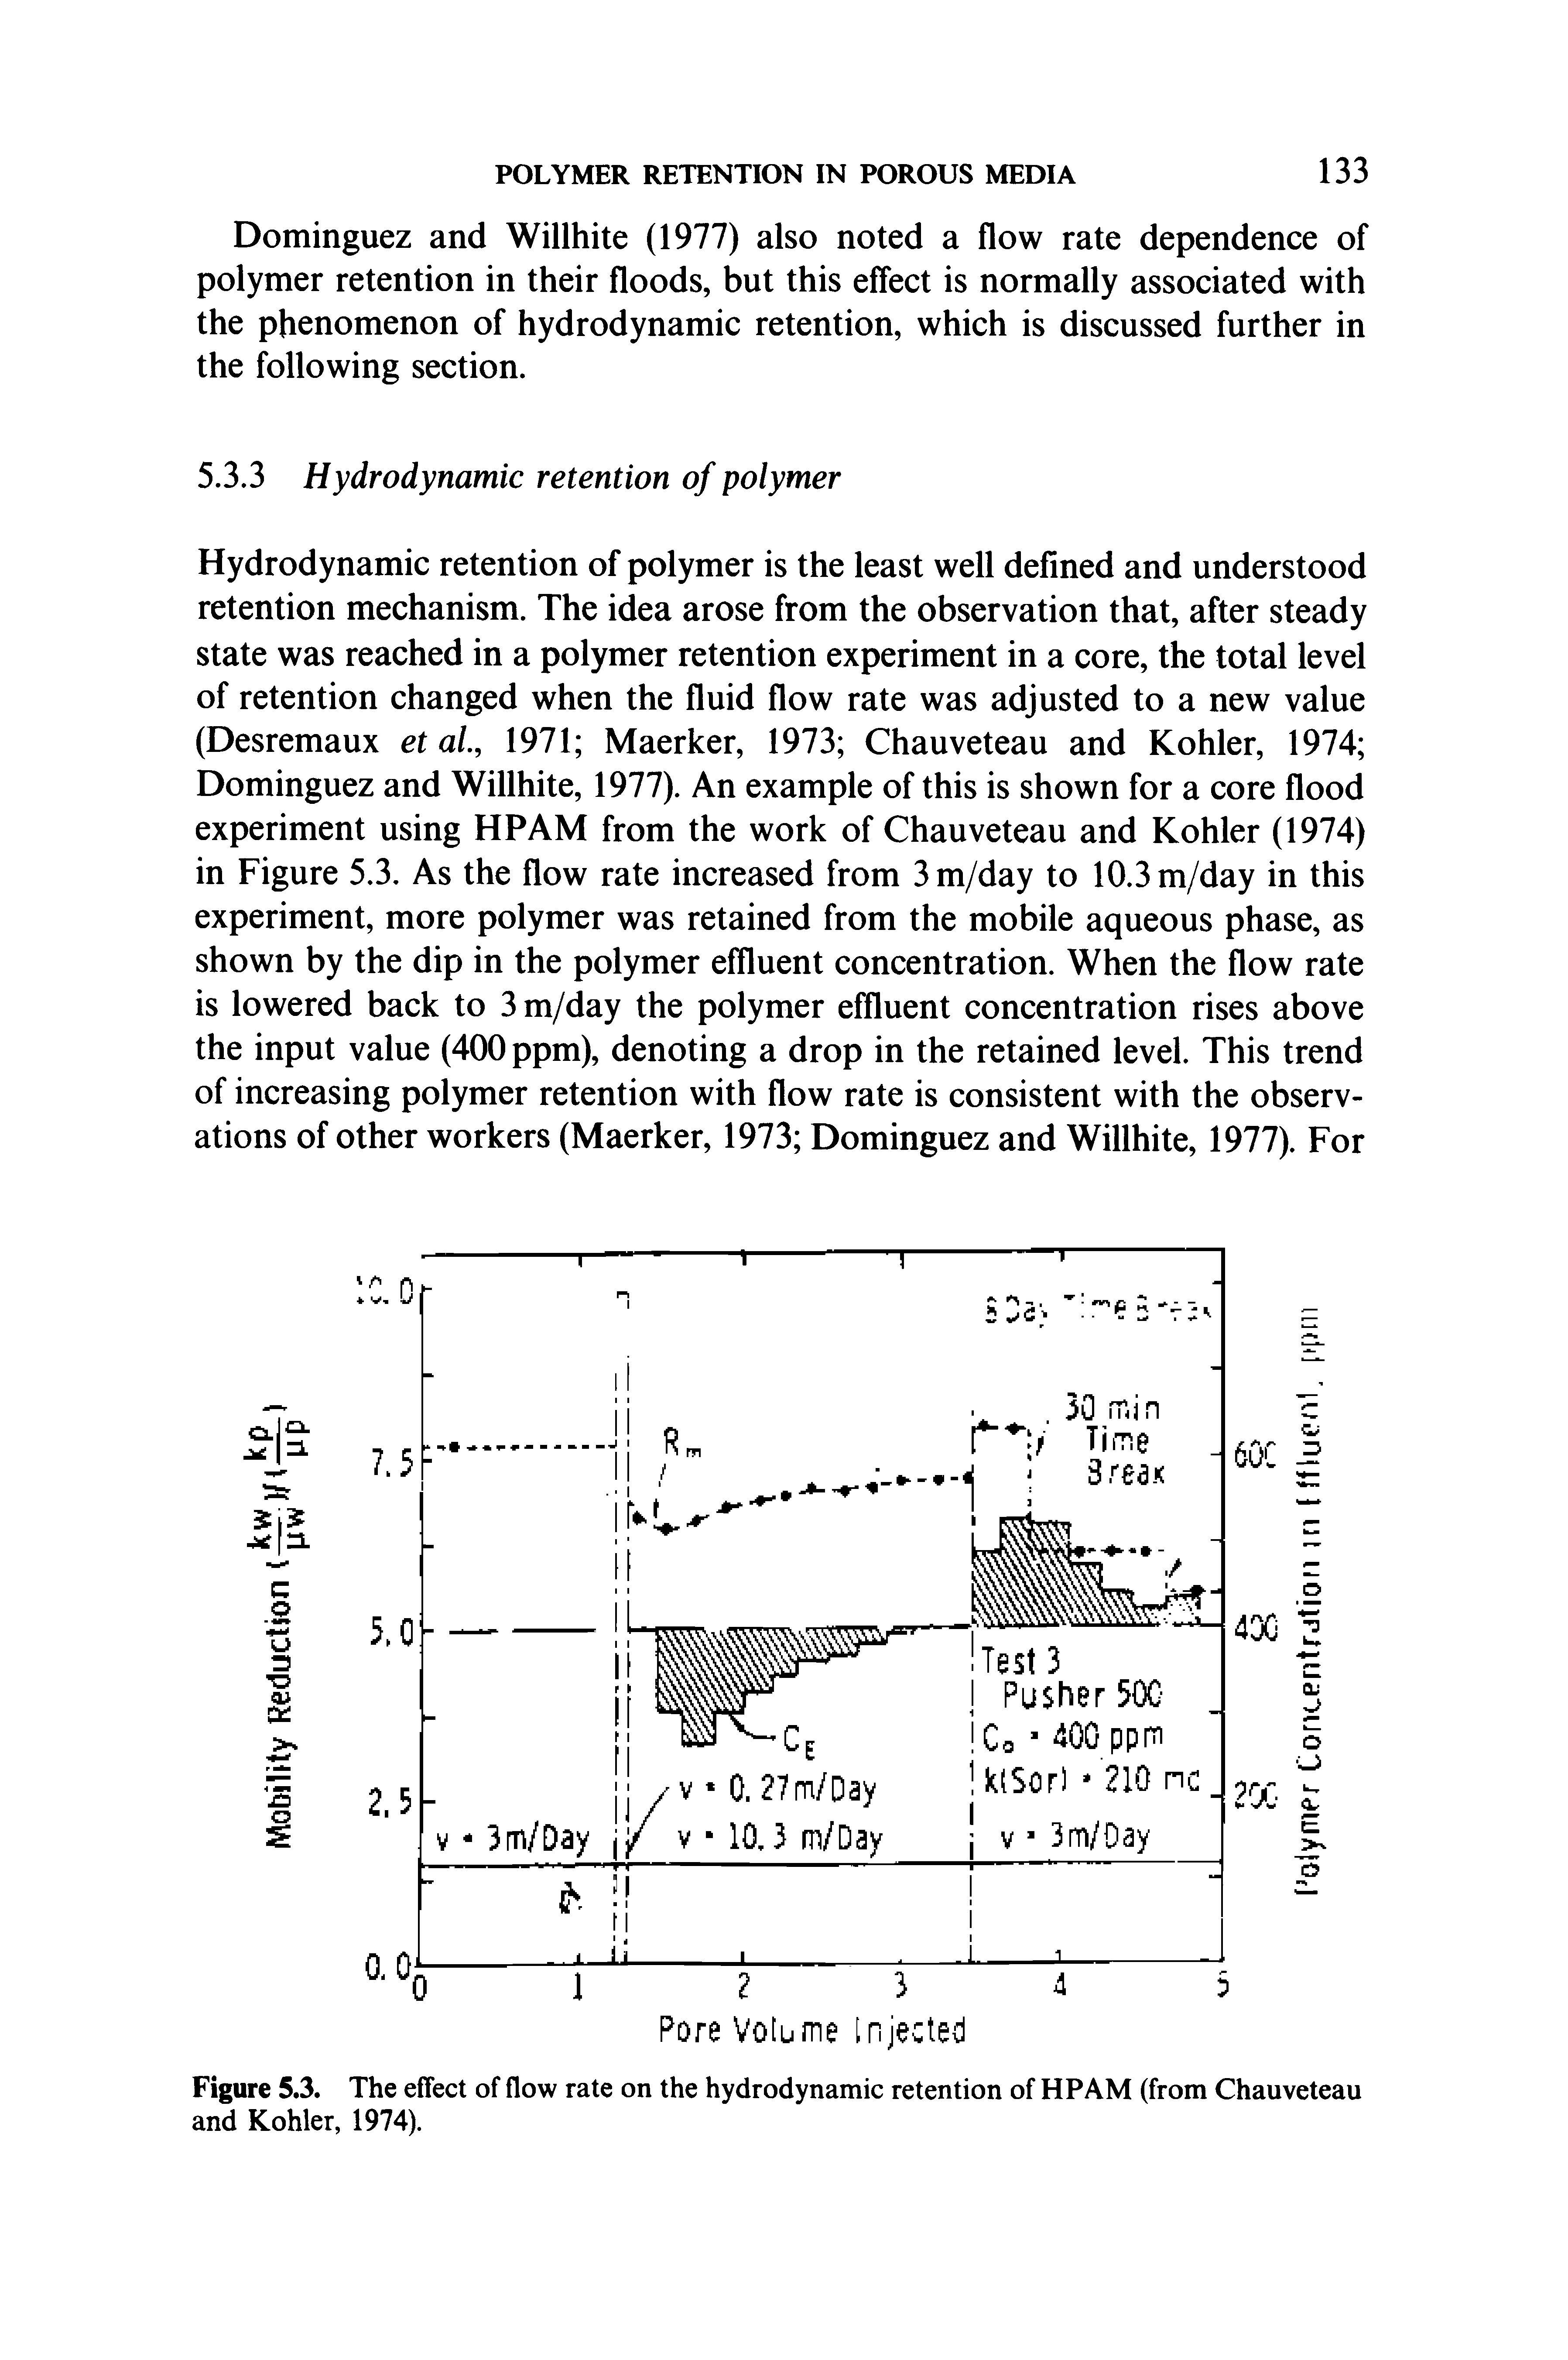 Figure 5.3. The effect of flow rate on the hydrodynamic retention of HPAM (from Chauveteau and Kohler, 1974).